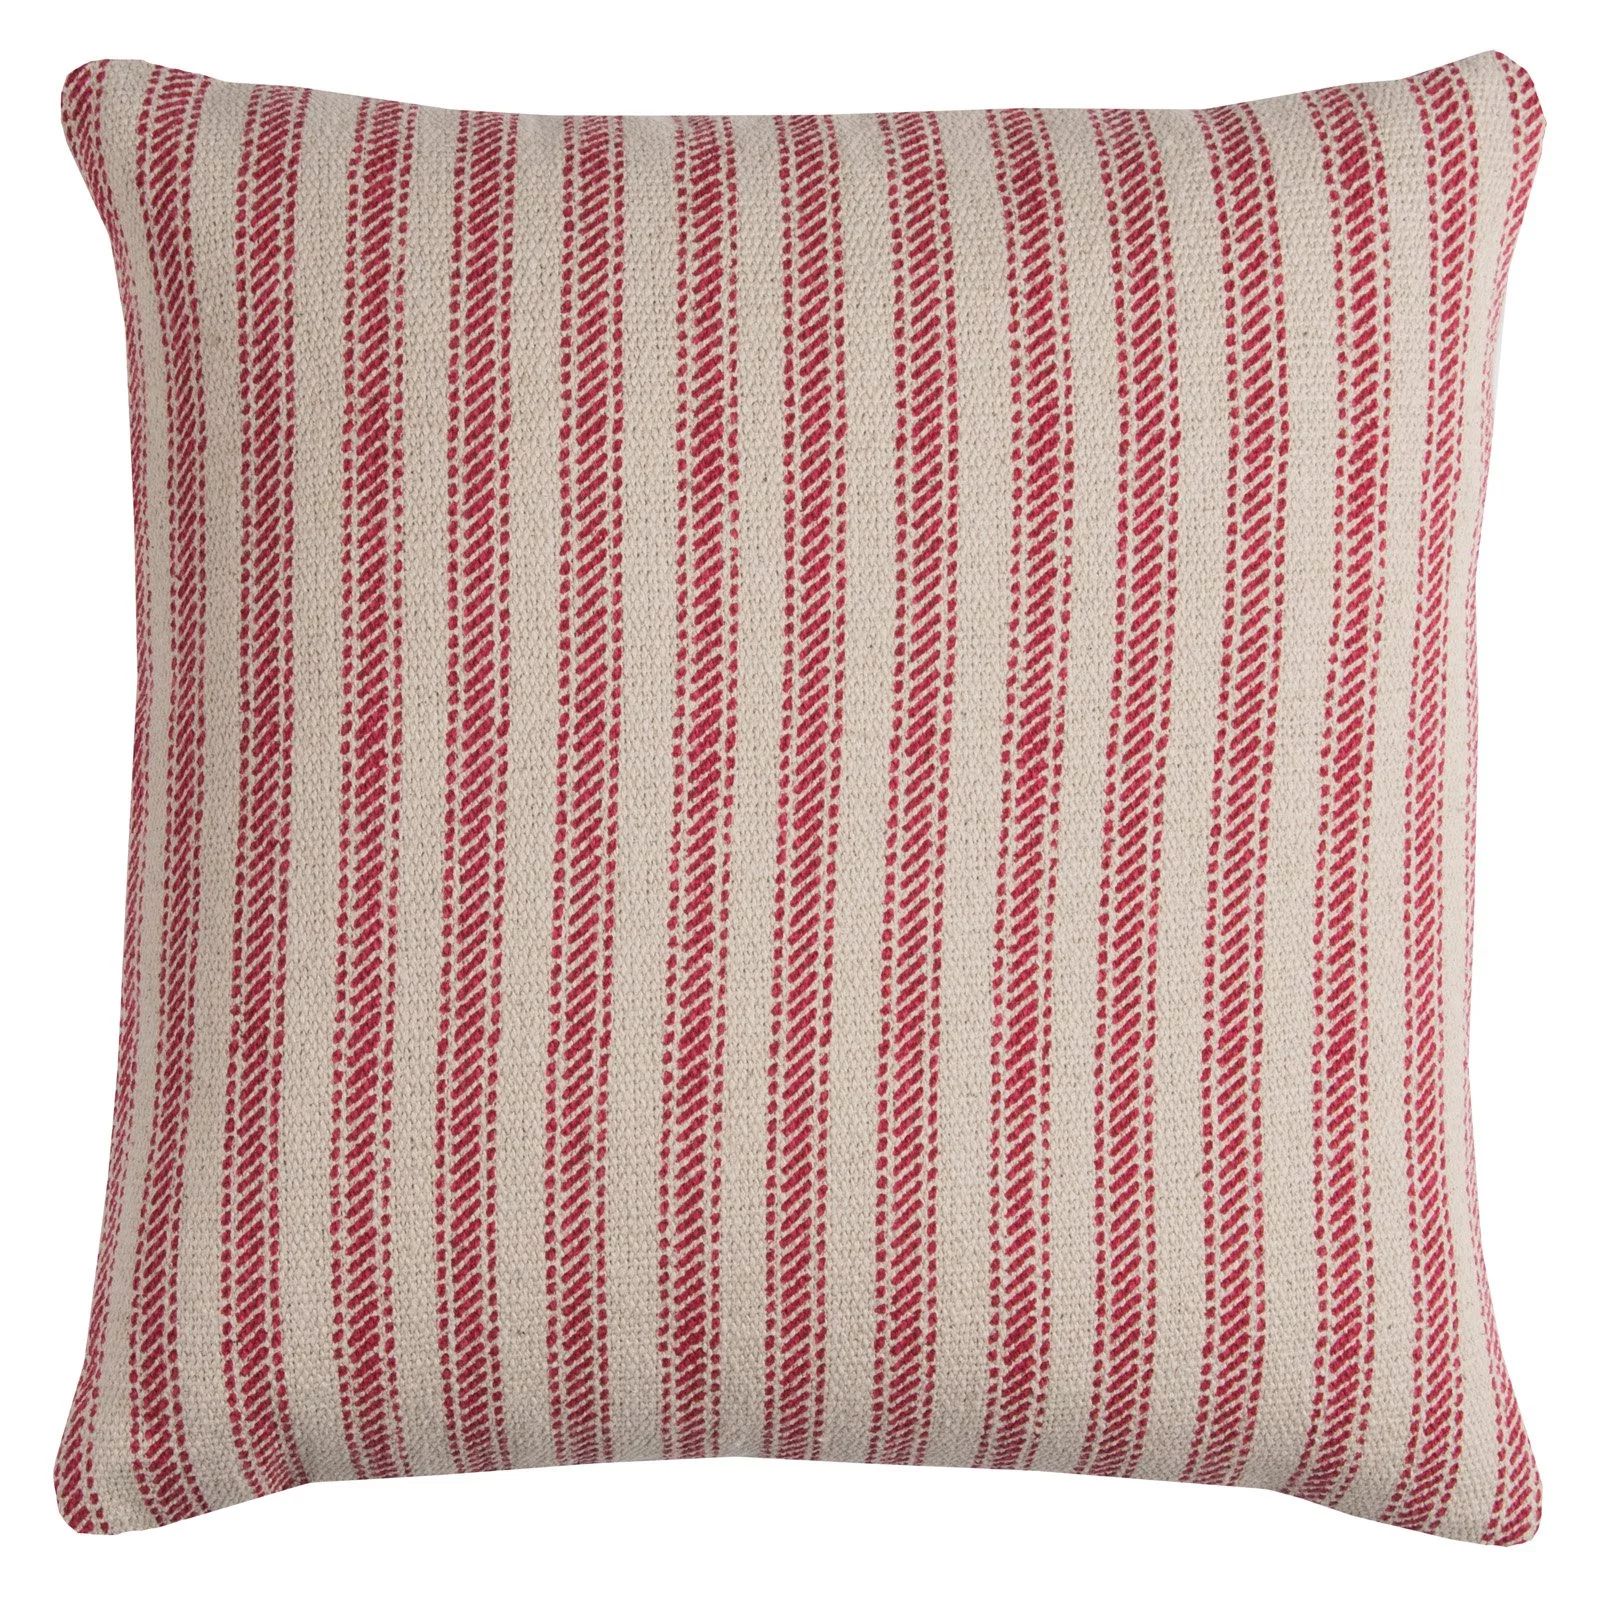 Rizzy Home Ticking Stripe Cotton with Zipper Closer Decorative Throw Pillow, 20" x 20", Red | Walmart (US)